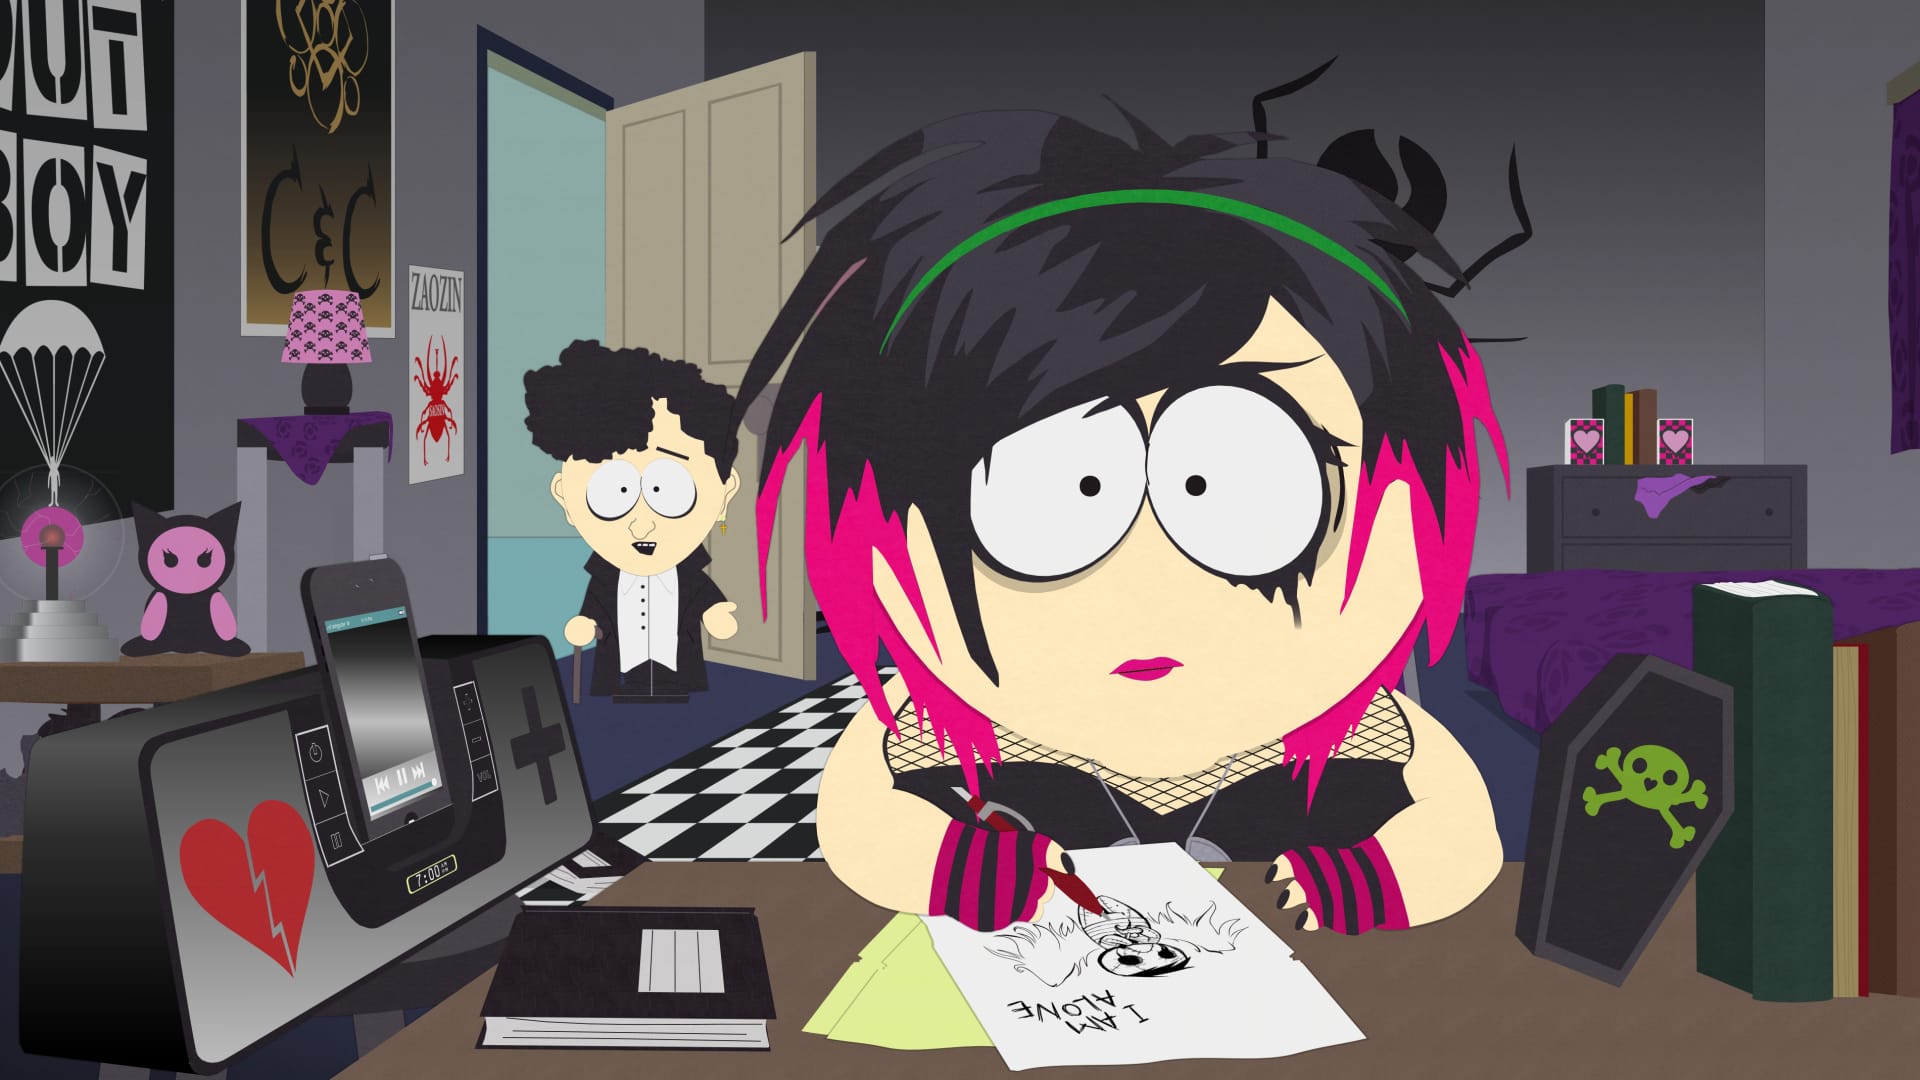 South Park - Goth Kids 3: Dawn of the Posers